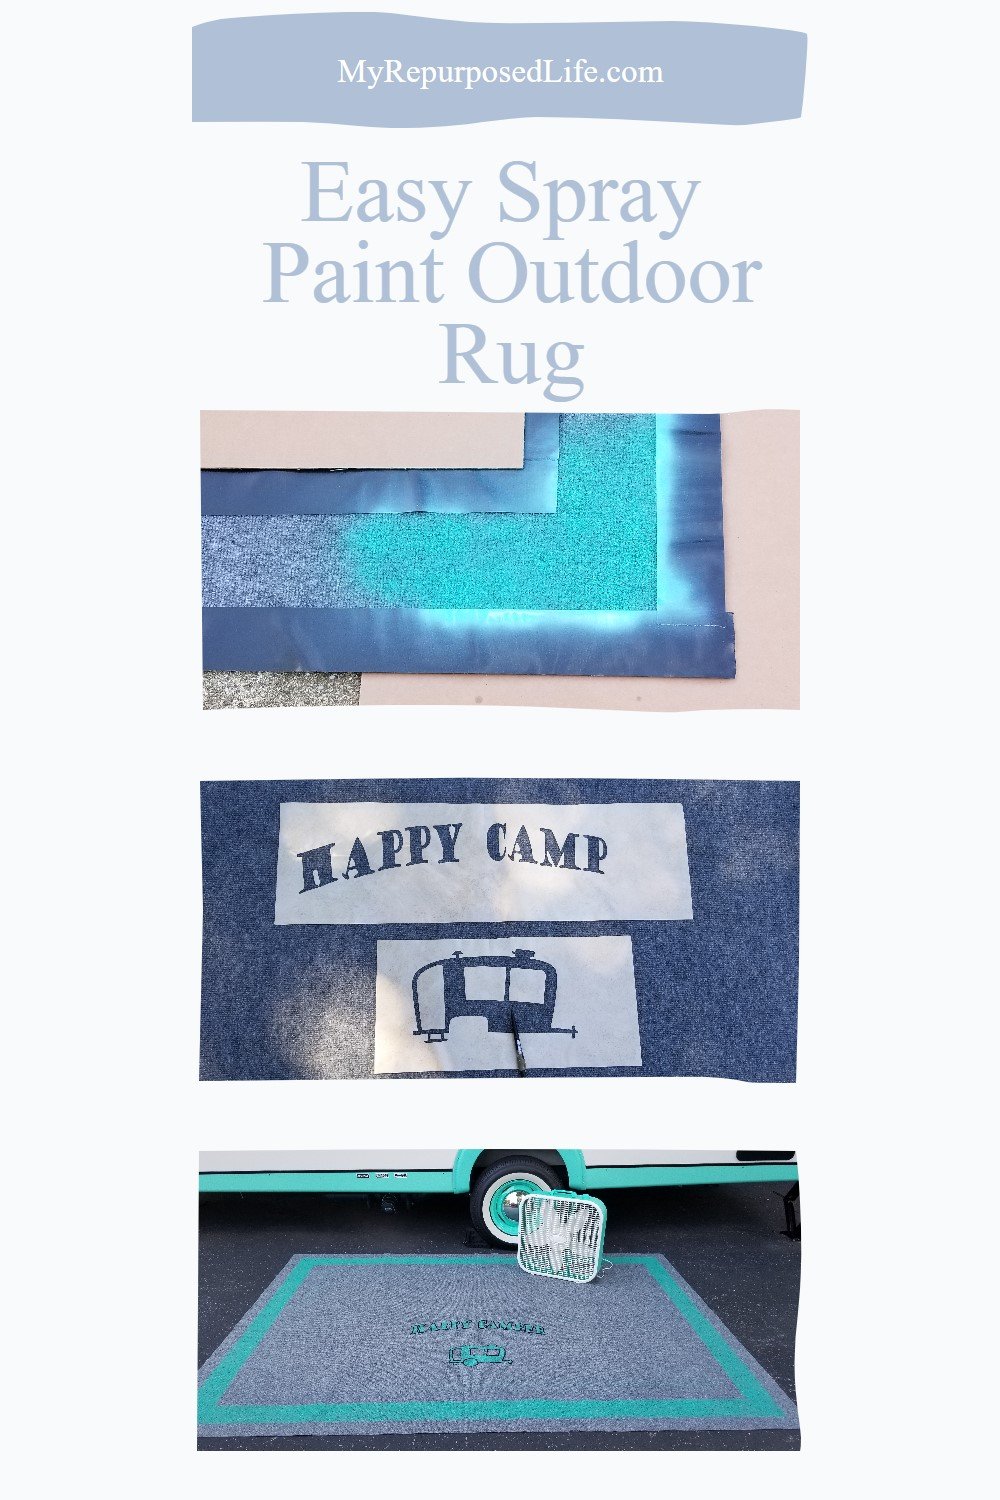 This spray painted outdoor rug project is so easy, you can do it this weekend! I'll give you tips and tricks to get great results when customizing your own outdoor rug with spray paint and stencils. Bonus content: how to spray paint a box fan. via @repurposedlife